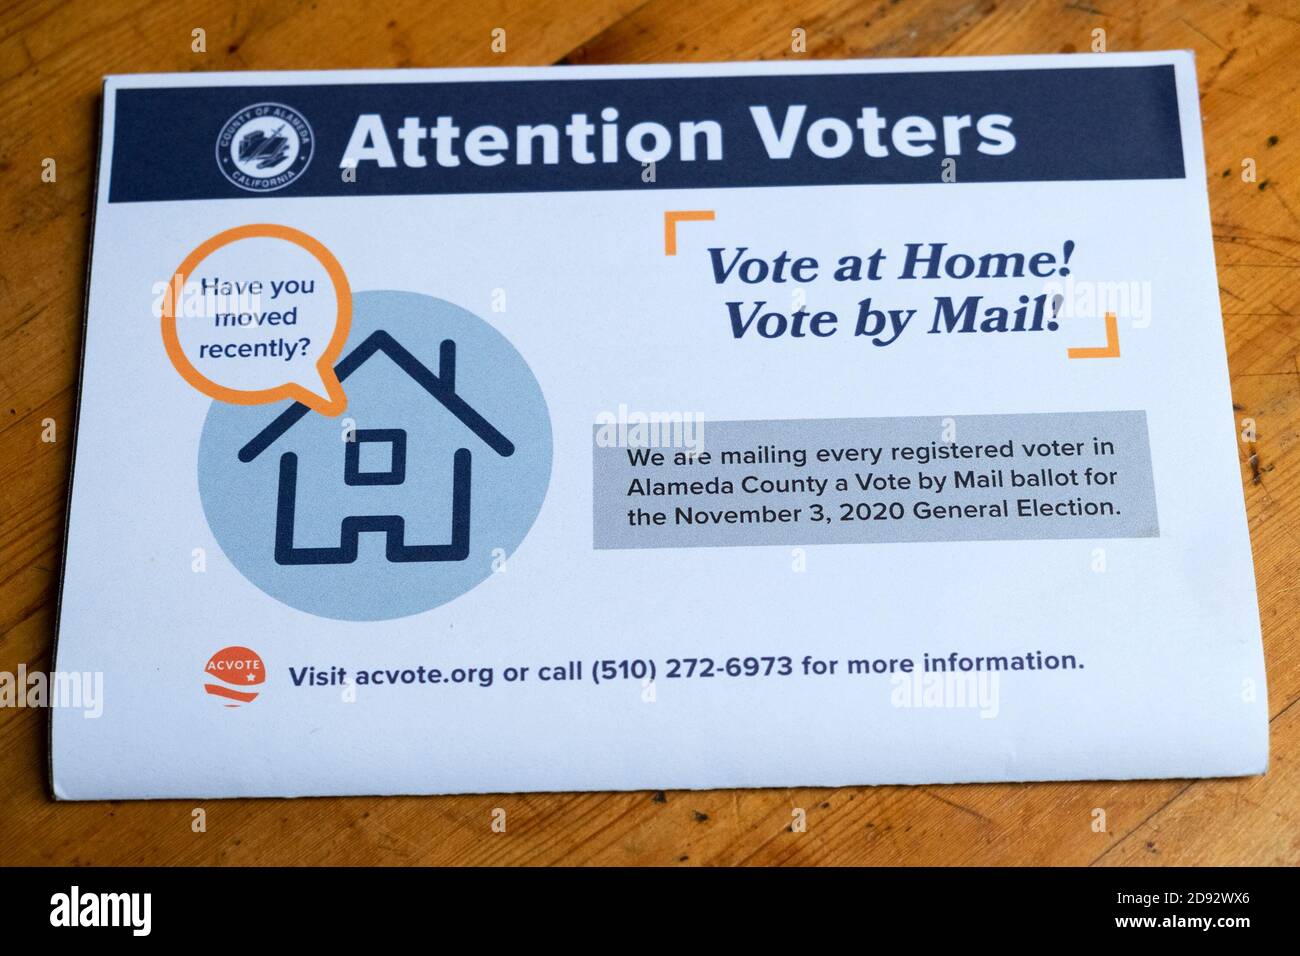 Attention Voters Vote at Home, Vote by Mail Alameda County California voting registration reminder information for the November 3 2020 US election Stock Photo